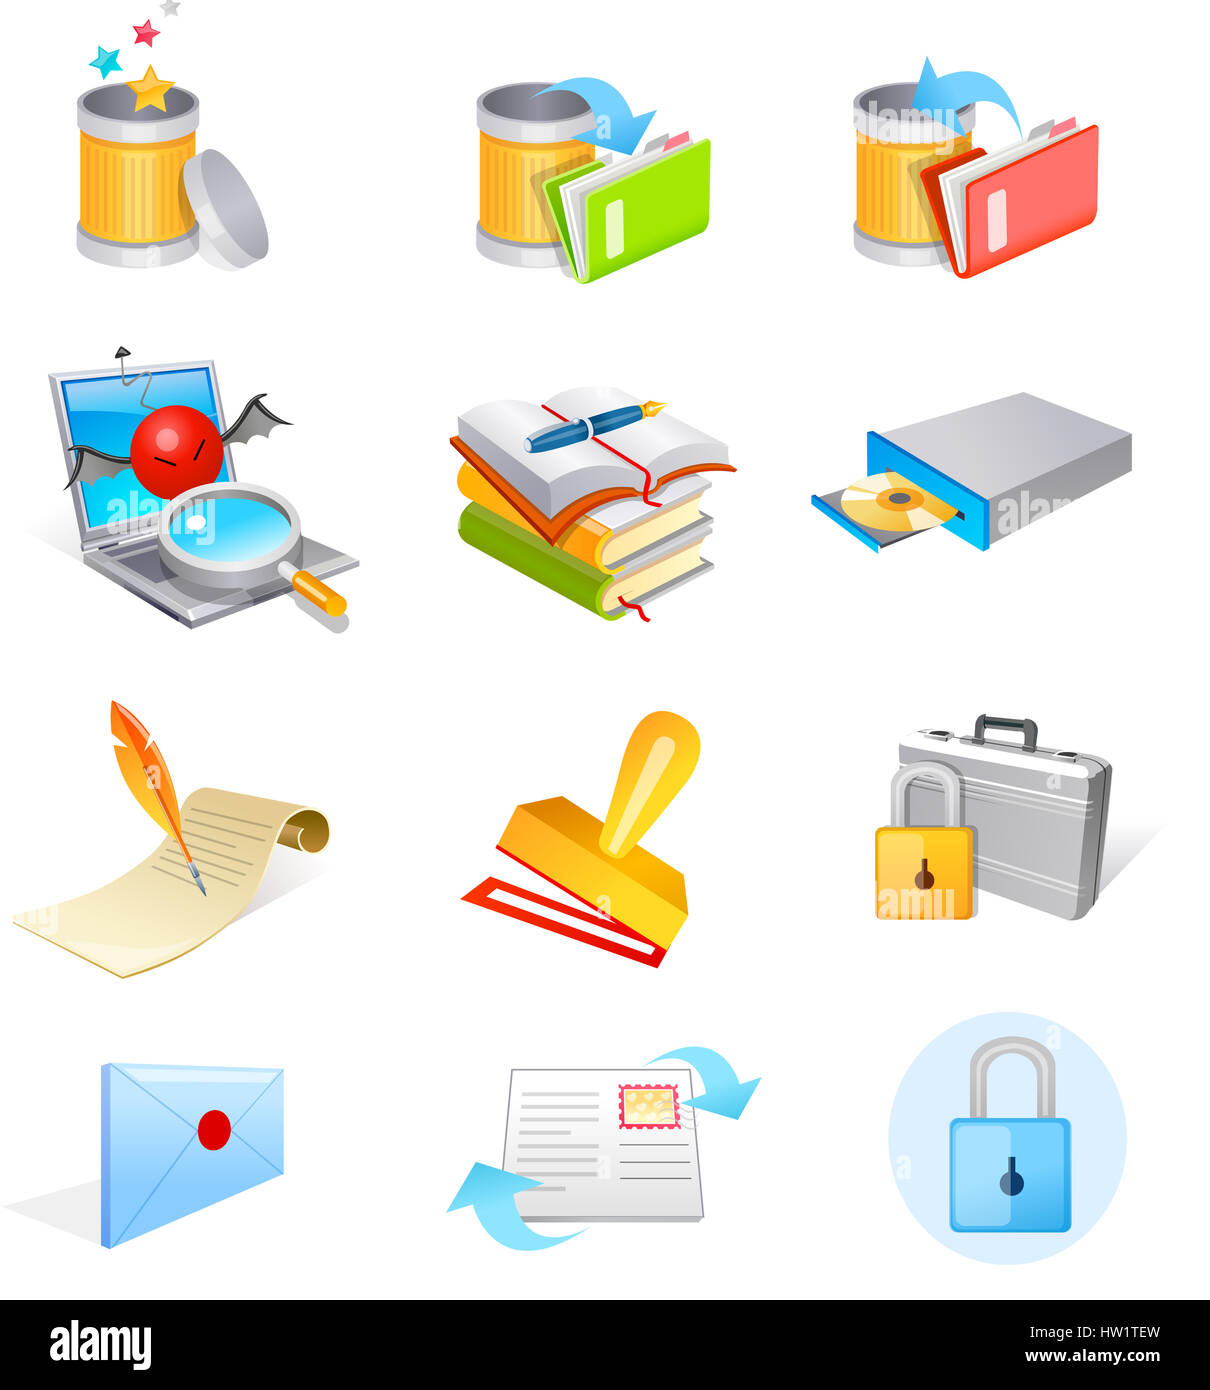 book,briefcase,cd player,clip art,clipart,color,colour,color image,communication,computer,computer graphics,computer icon,container,correspondence,digitally generated image,envelope,file,garbage can,graphics,icon,illustration,laptop,efficiency,large group Stock Photo